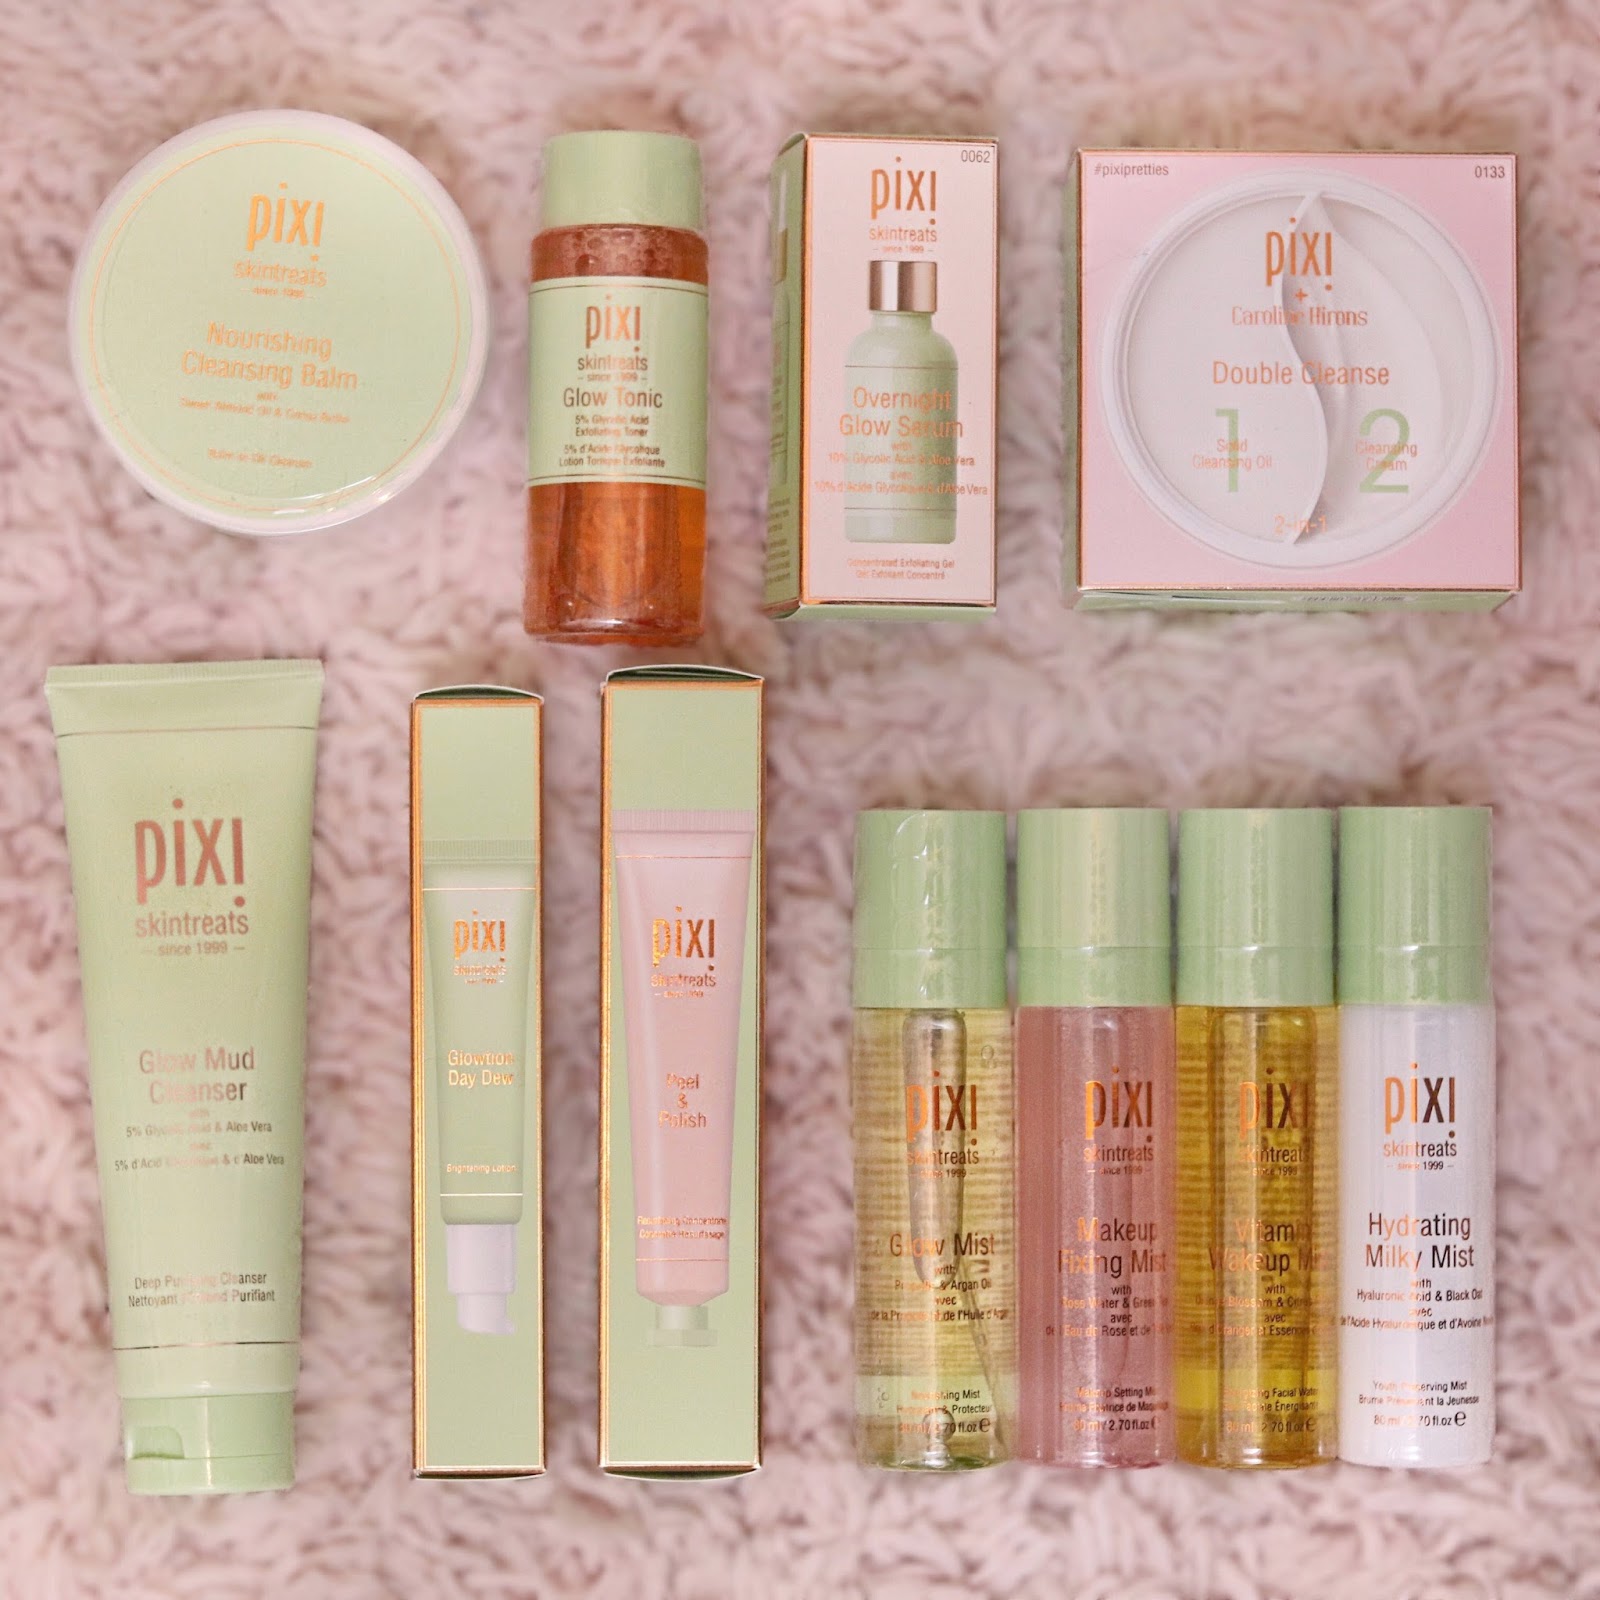 Pixi Skincare Products GIVEAWAY